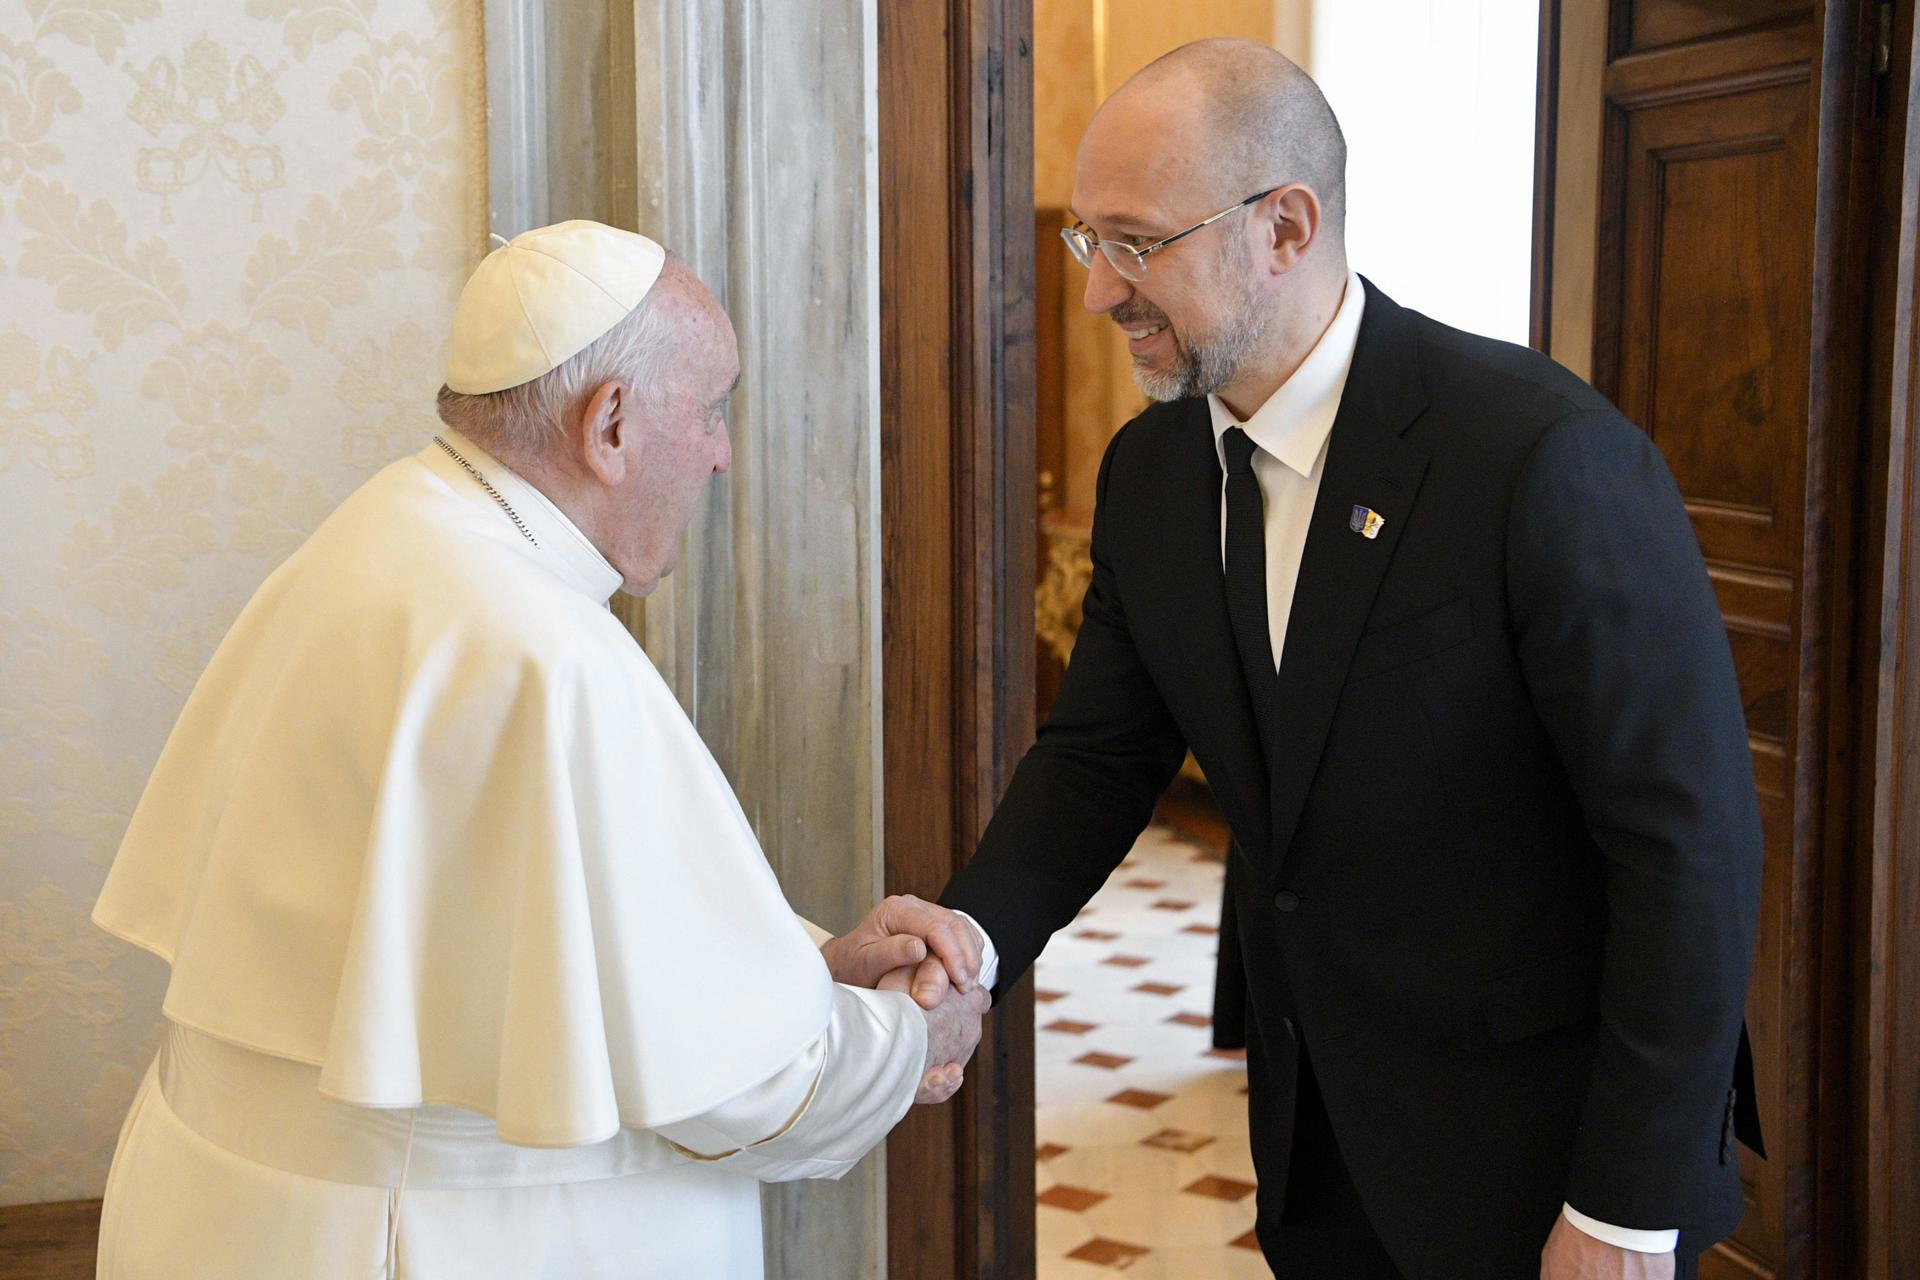 A handout picture provided by the Vatican Media shows Pope Francis (L) shaking hands with Ukraine's Prime Minister Denys Shmyhal before a meeting, Vatican City, 27 April 2023. EFE-EPA/VATICAN MEDIA HANDOUT HANDOUT EDITORIAL USE ONLY/NO SALES